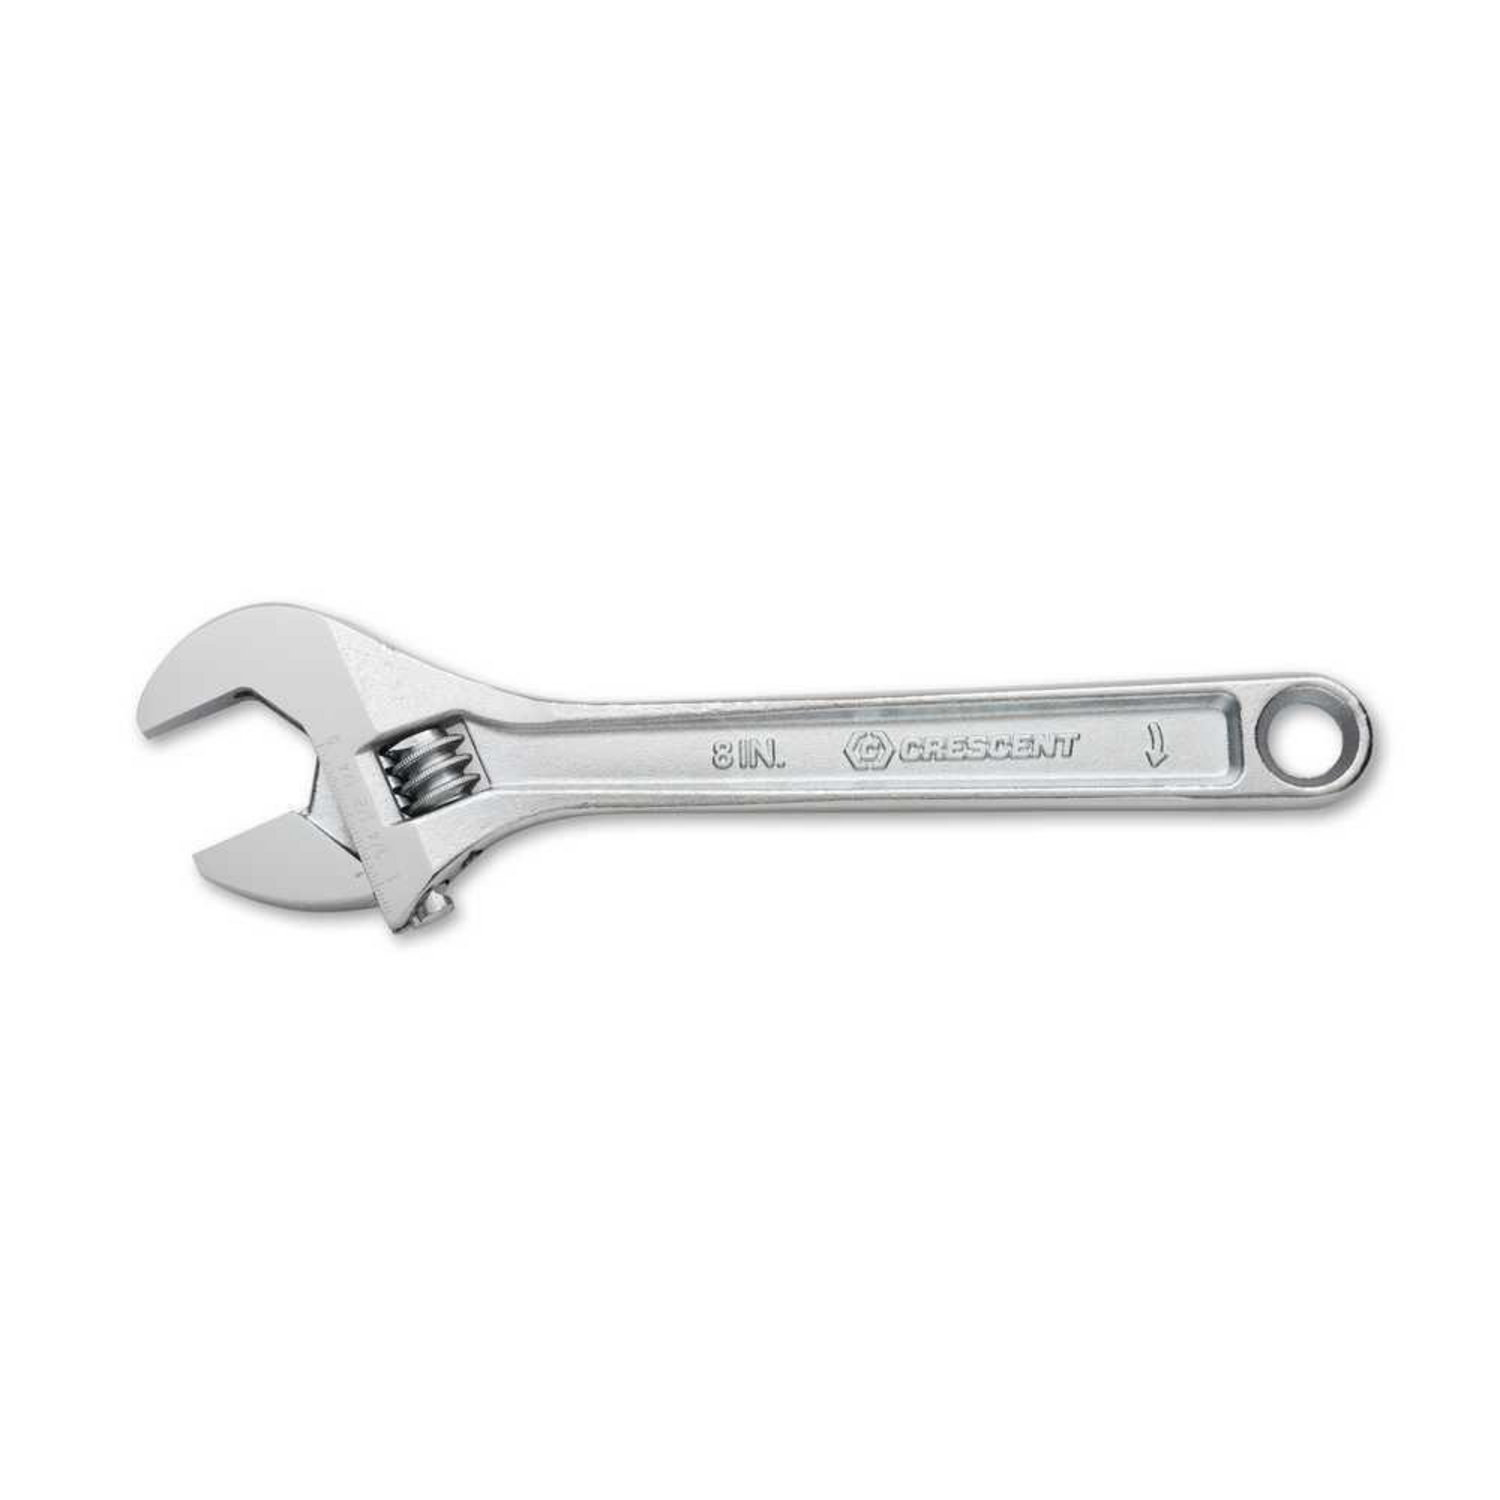 Crescent Metric and SAE Adjustable Wrench 8 in. L 1 pc